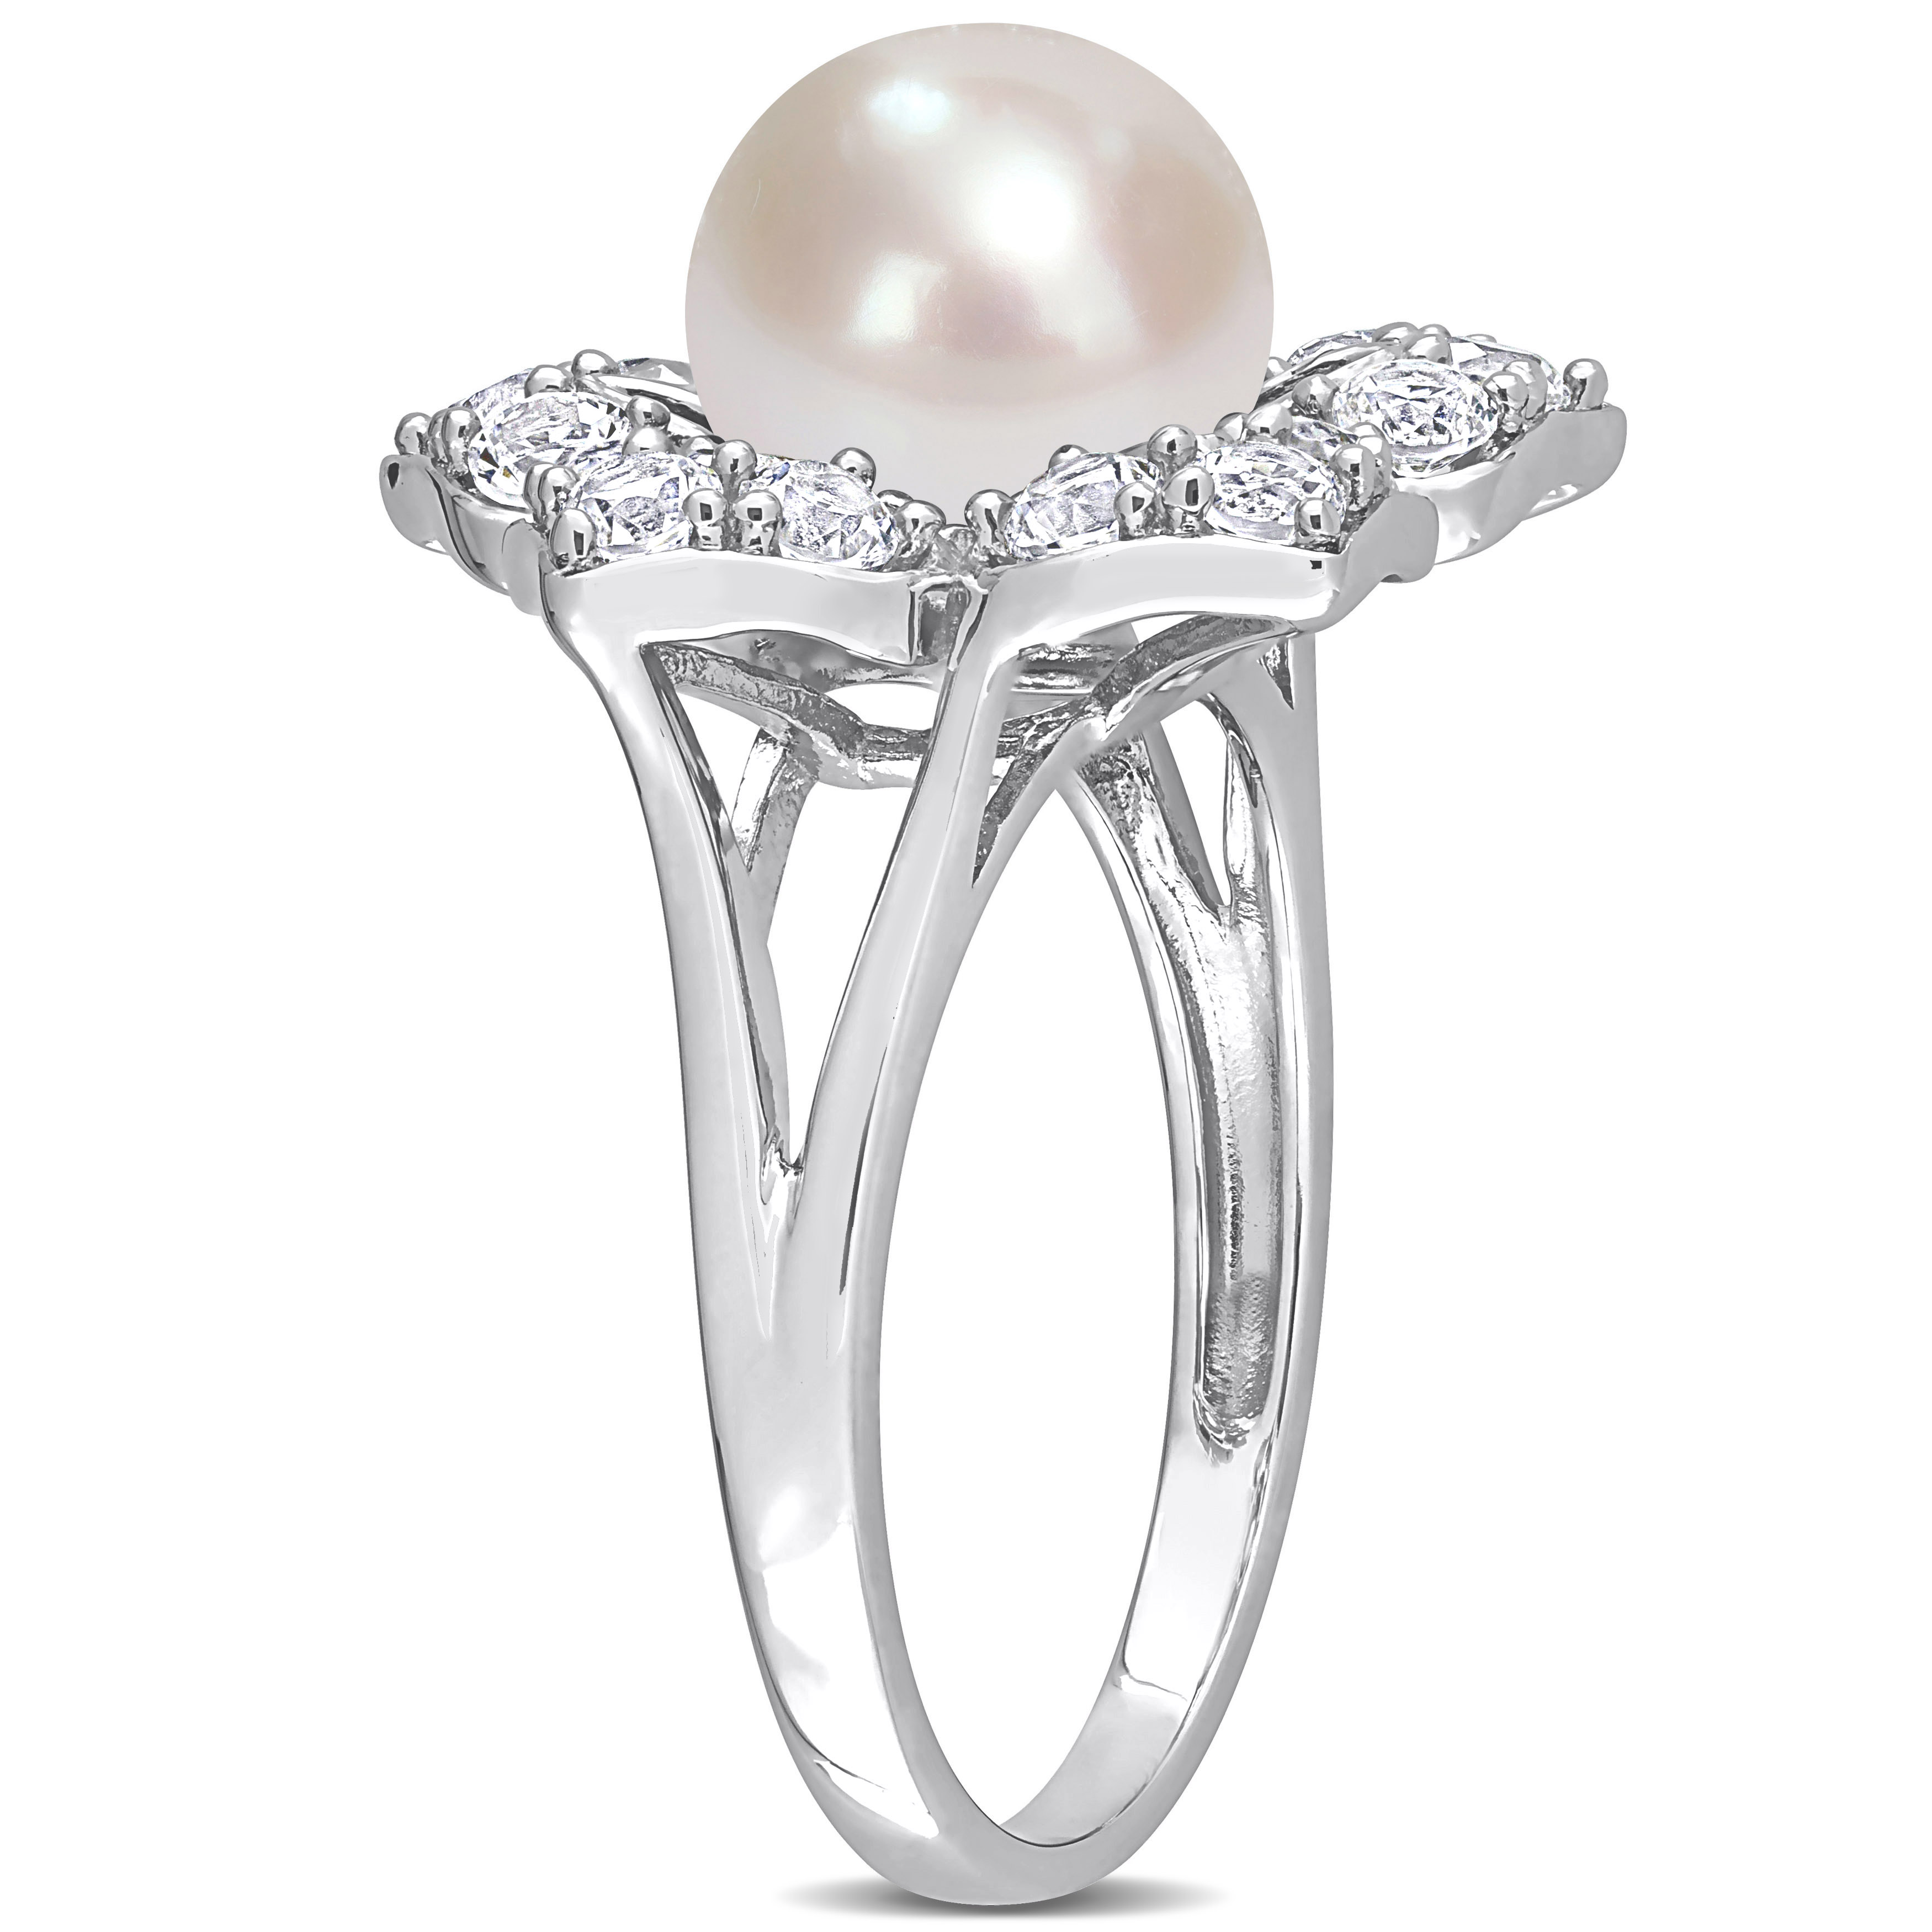 8.5-9 MM Freshwater Cultured Pearl and 1 1/3 CT TGW Created White Sapphire Floral Pearl Ring in Sterling Silver